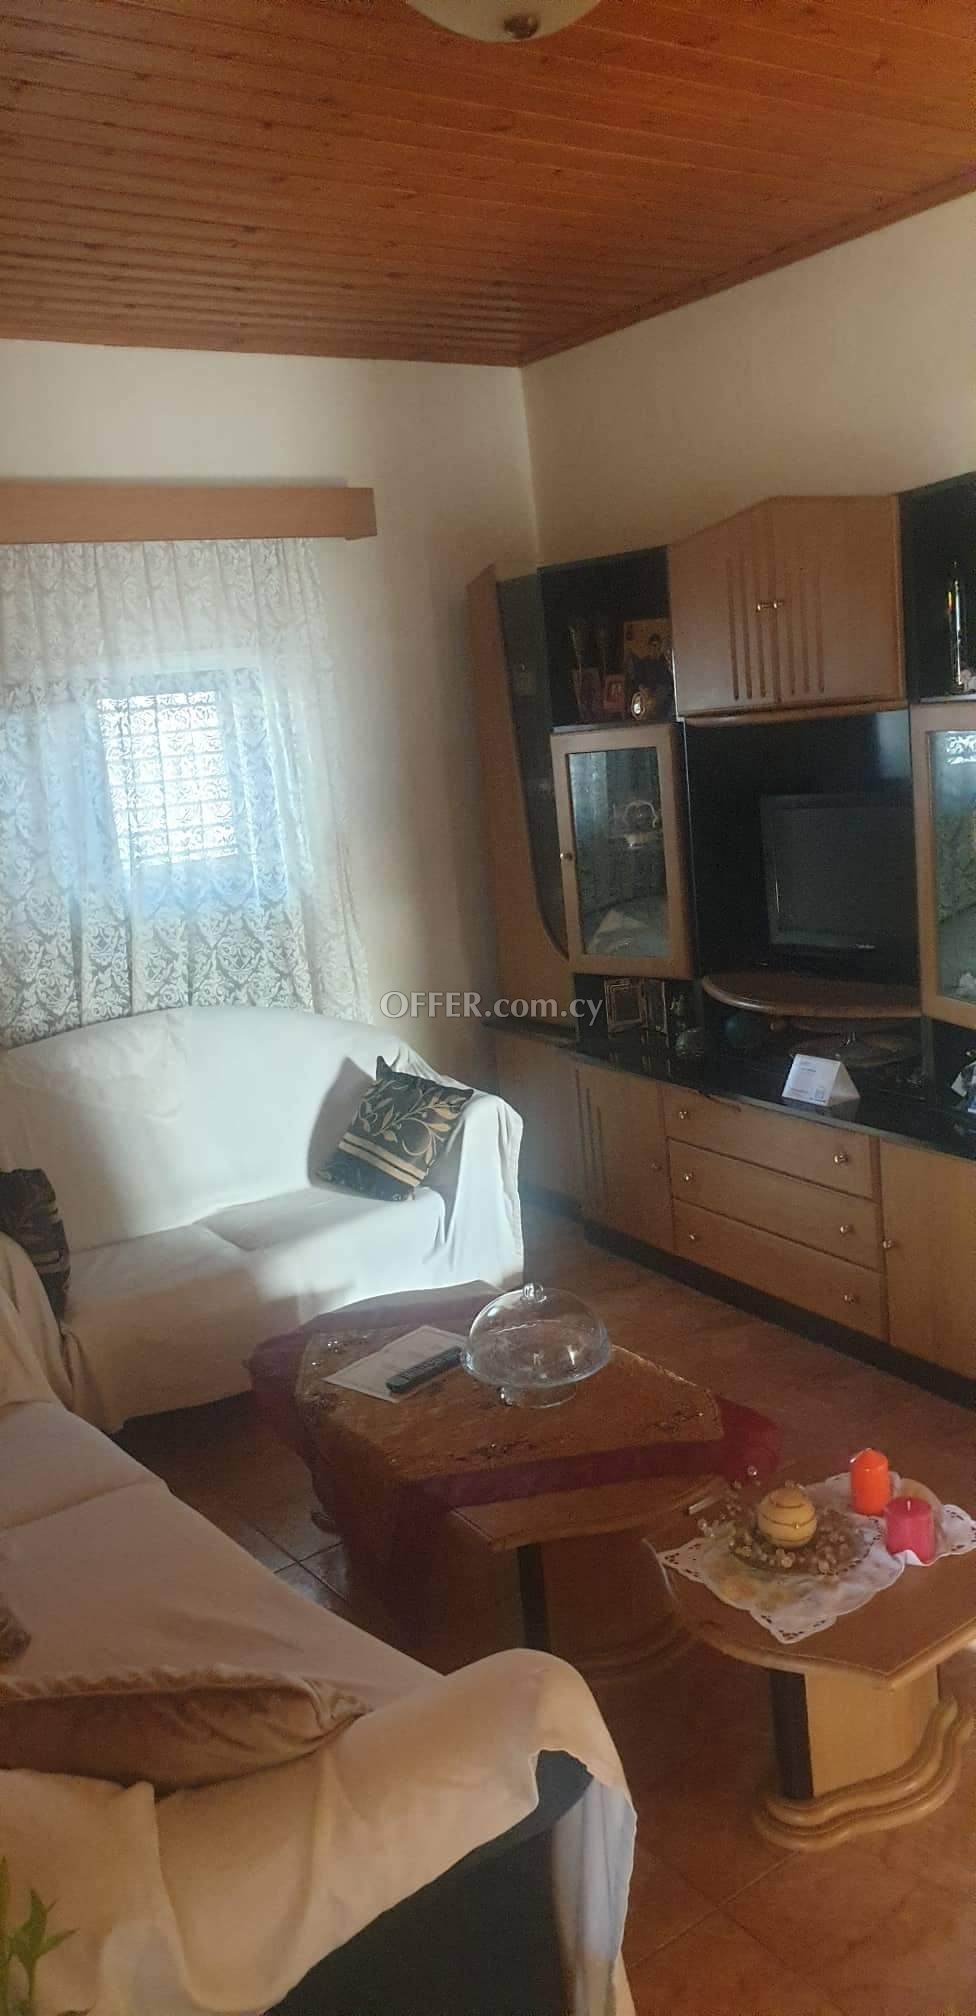 New For Sale €135,000 House (1 level bungalow) 2 bedrooms, Alethriko Larnaca - 6